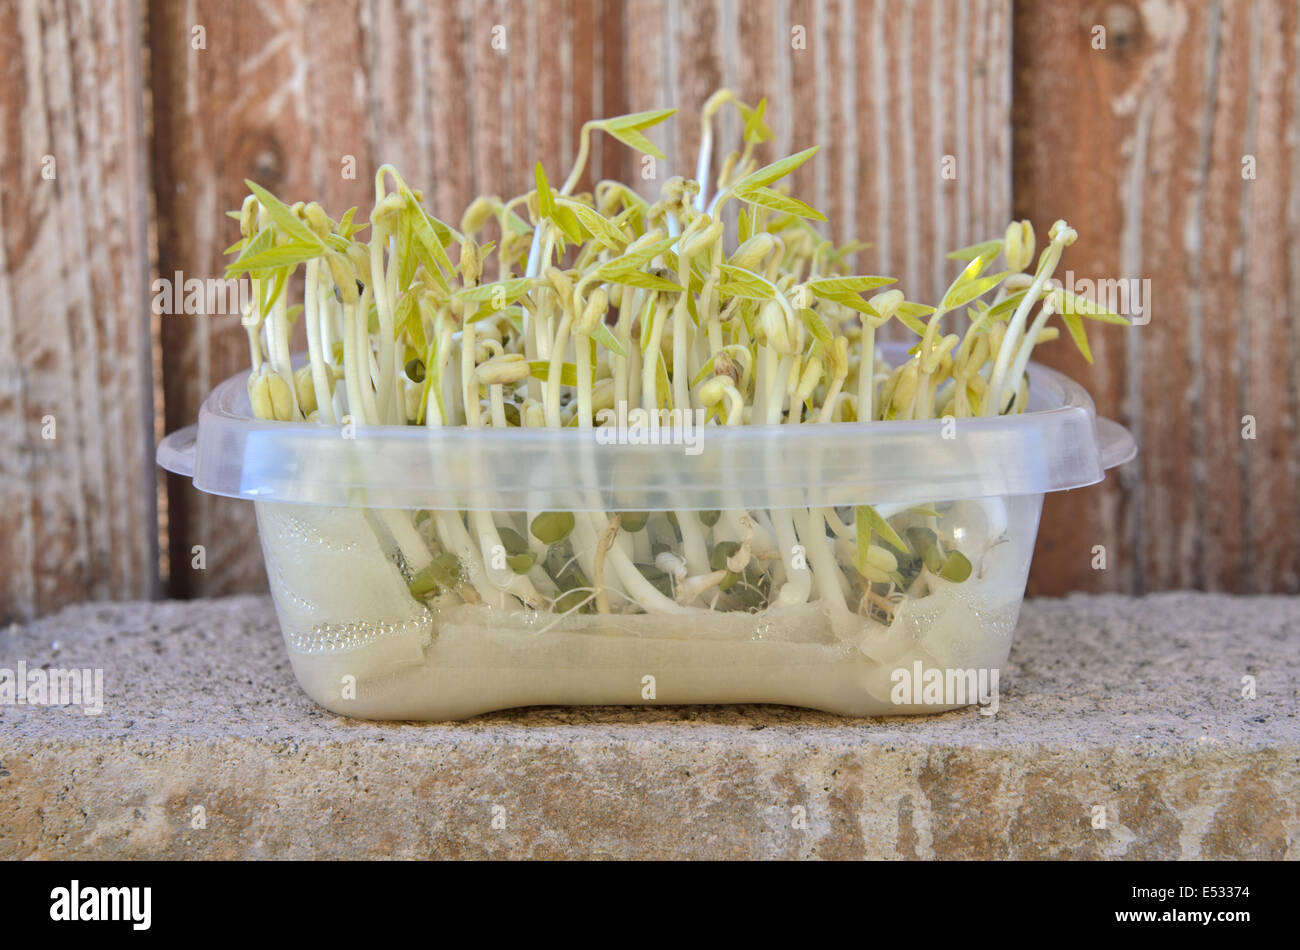 Growing bean sprouts with wet tissue paper in kitchen storage Stock Photo